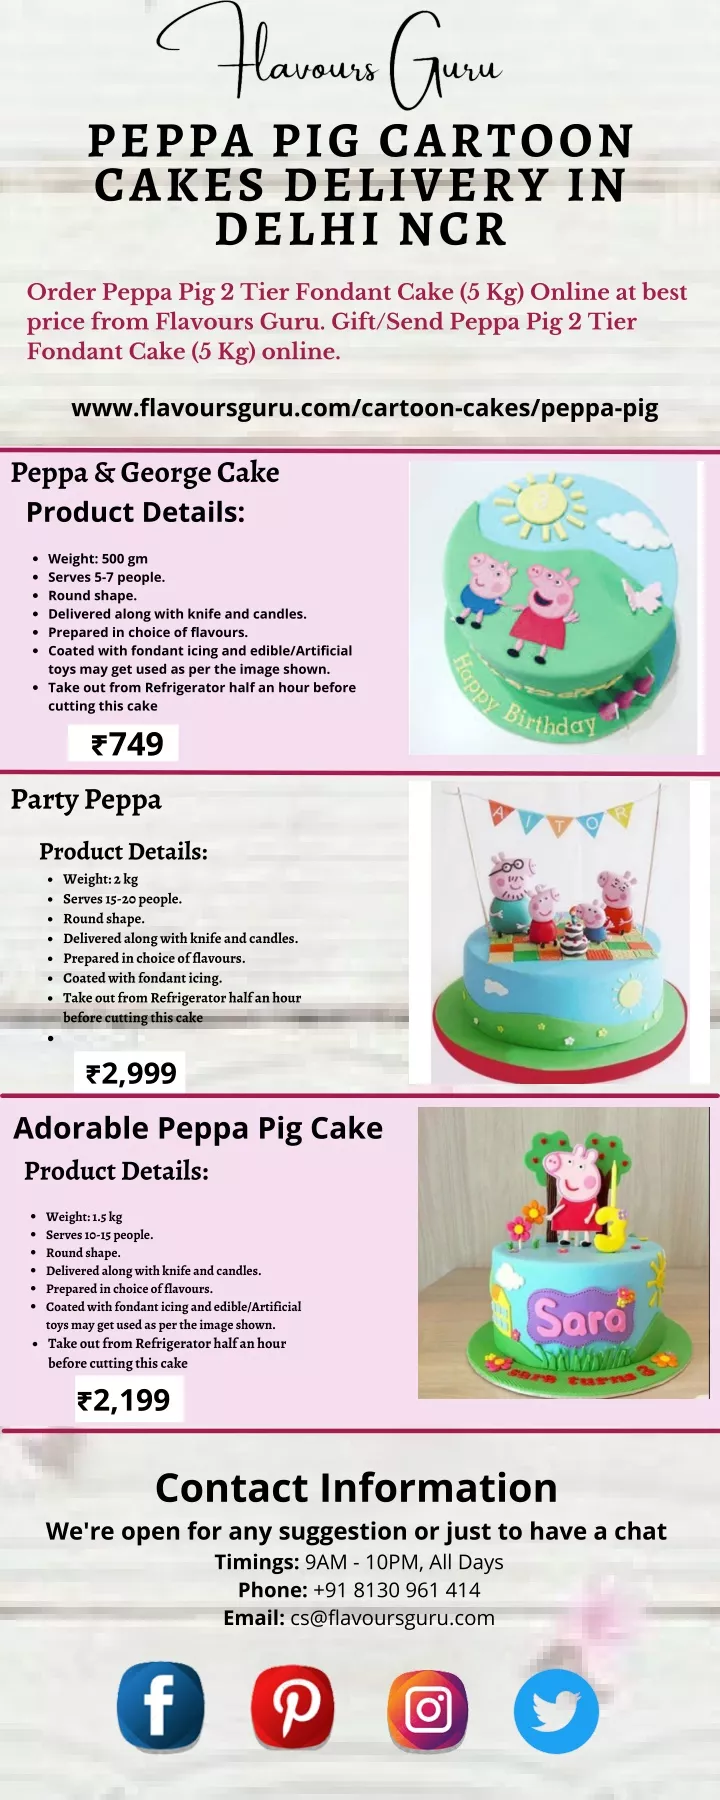 peppa pig cartoon cakes delivery in delhi ncr